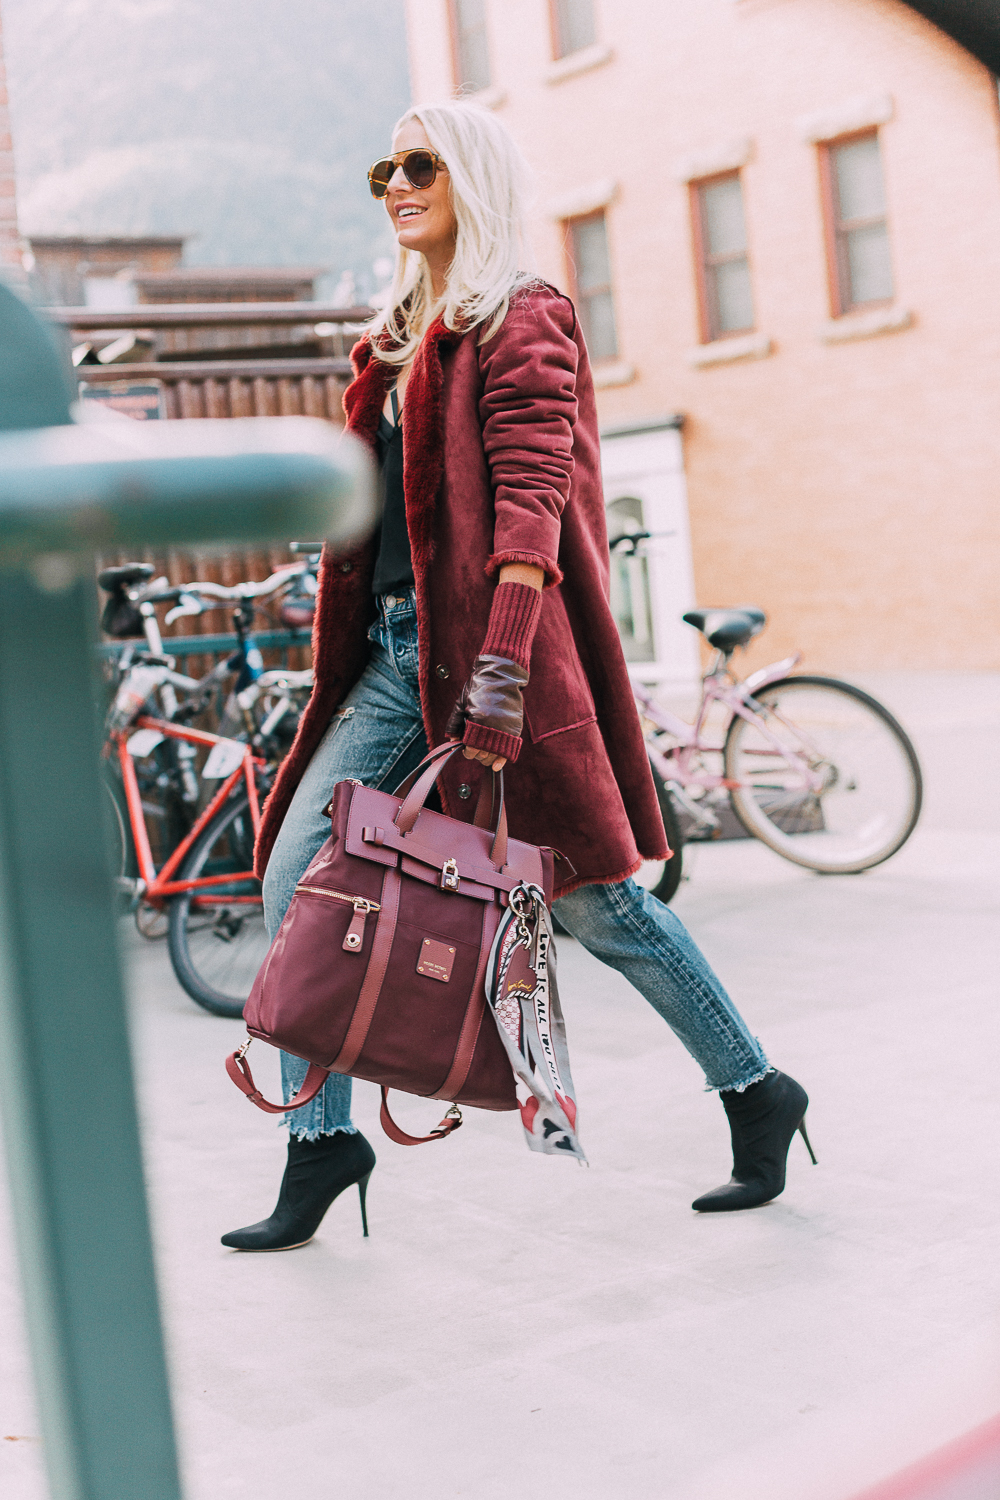 burgundy Jetsetter backpack paired with burgundy plush coat, cropped Moussy jeans, Stuart Weitzman sock booties and fingerless gloves, way to look chic on-the-go